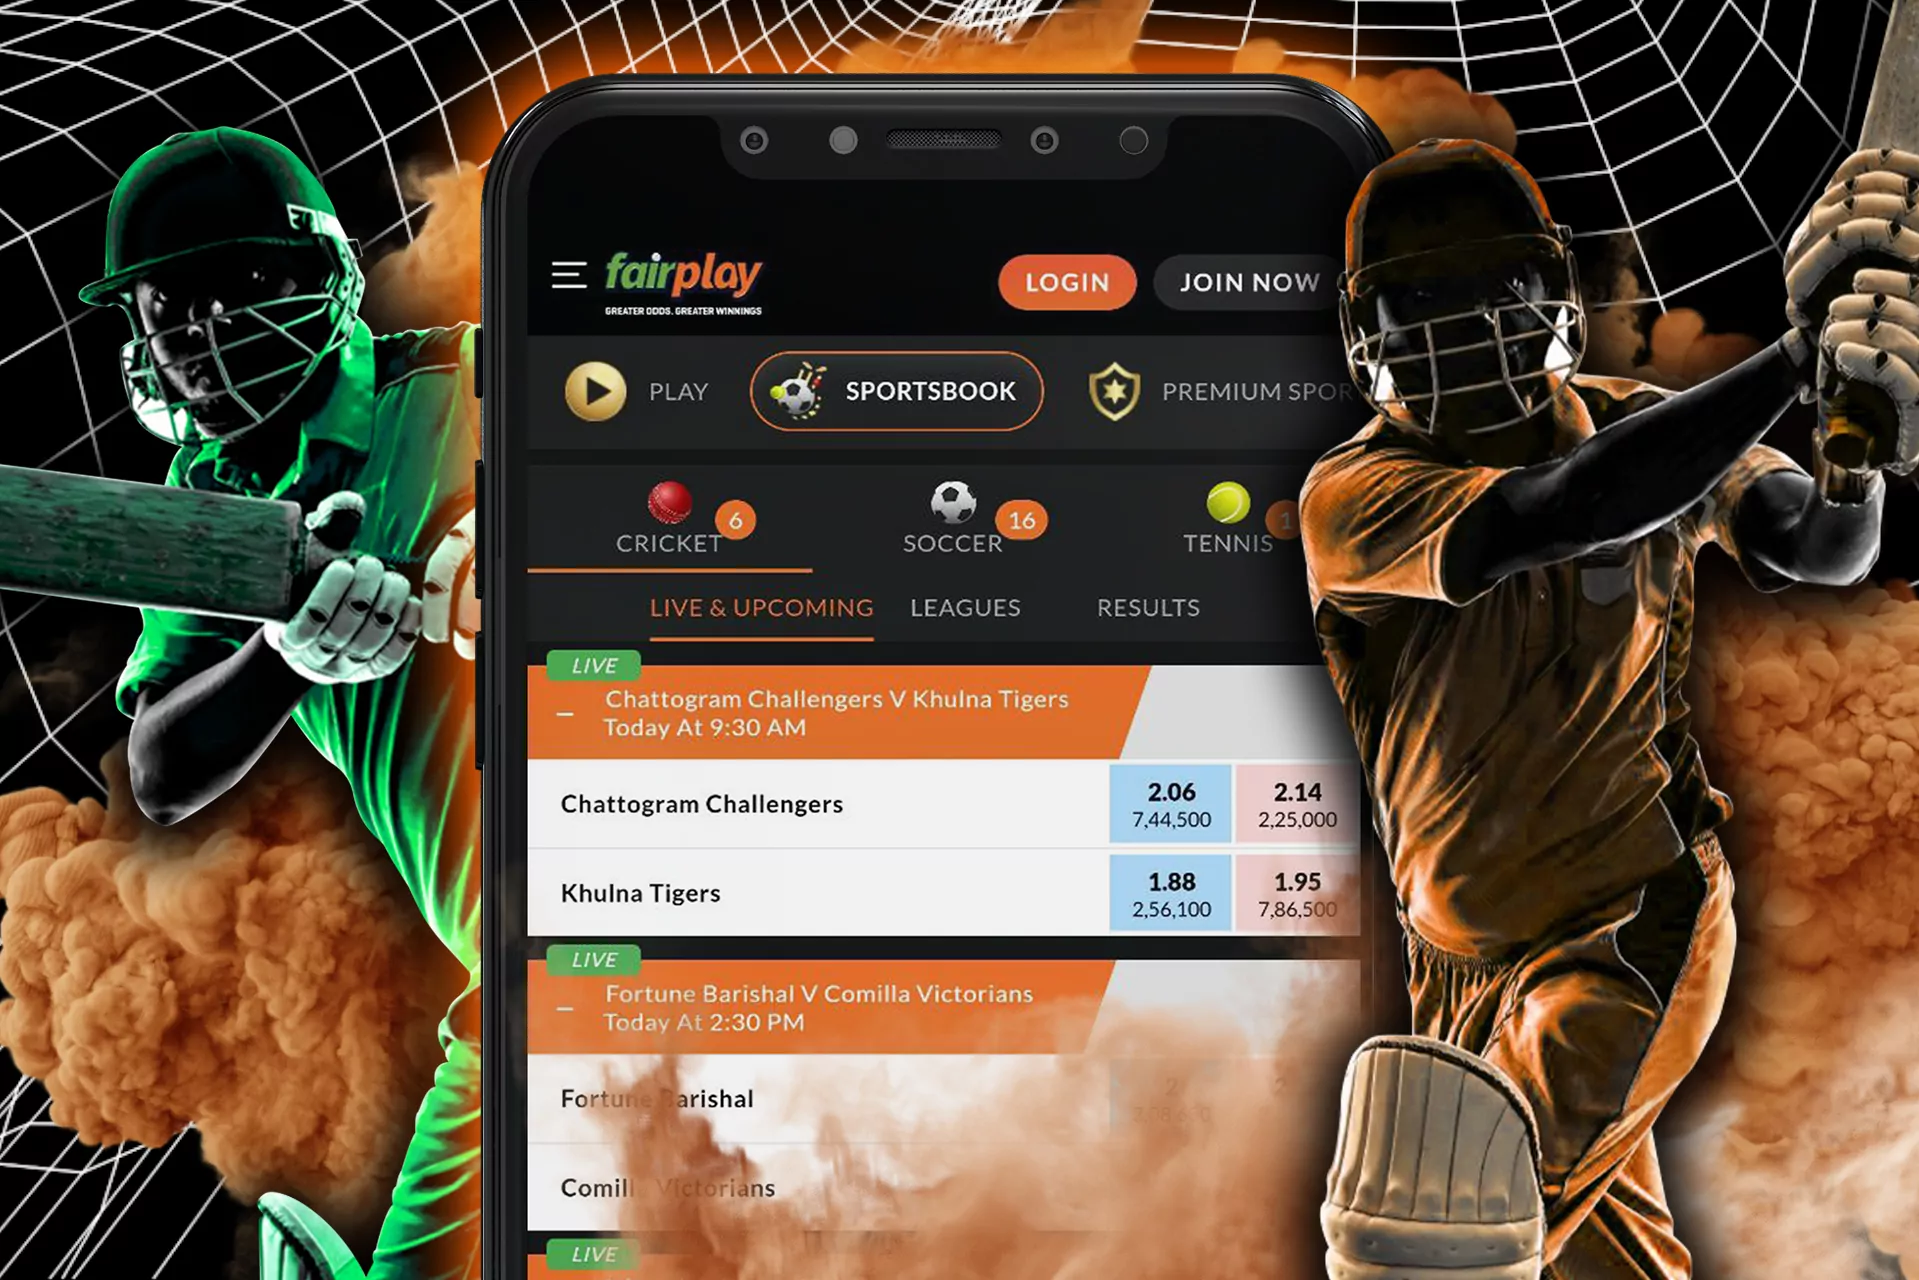 Place bets on cricket teams in the Fairplay sportsbook.